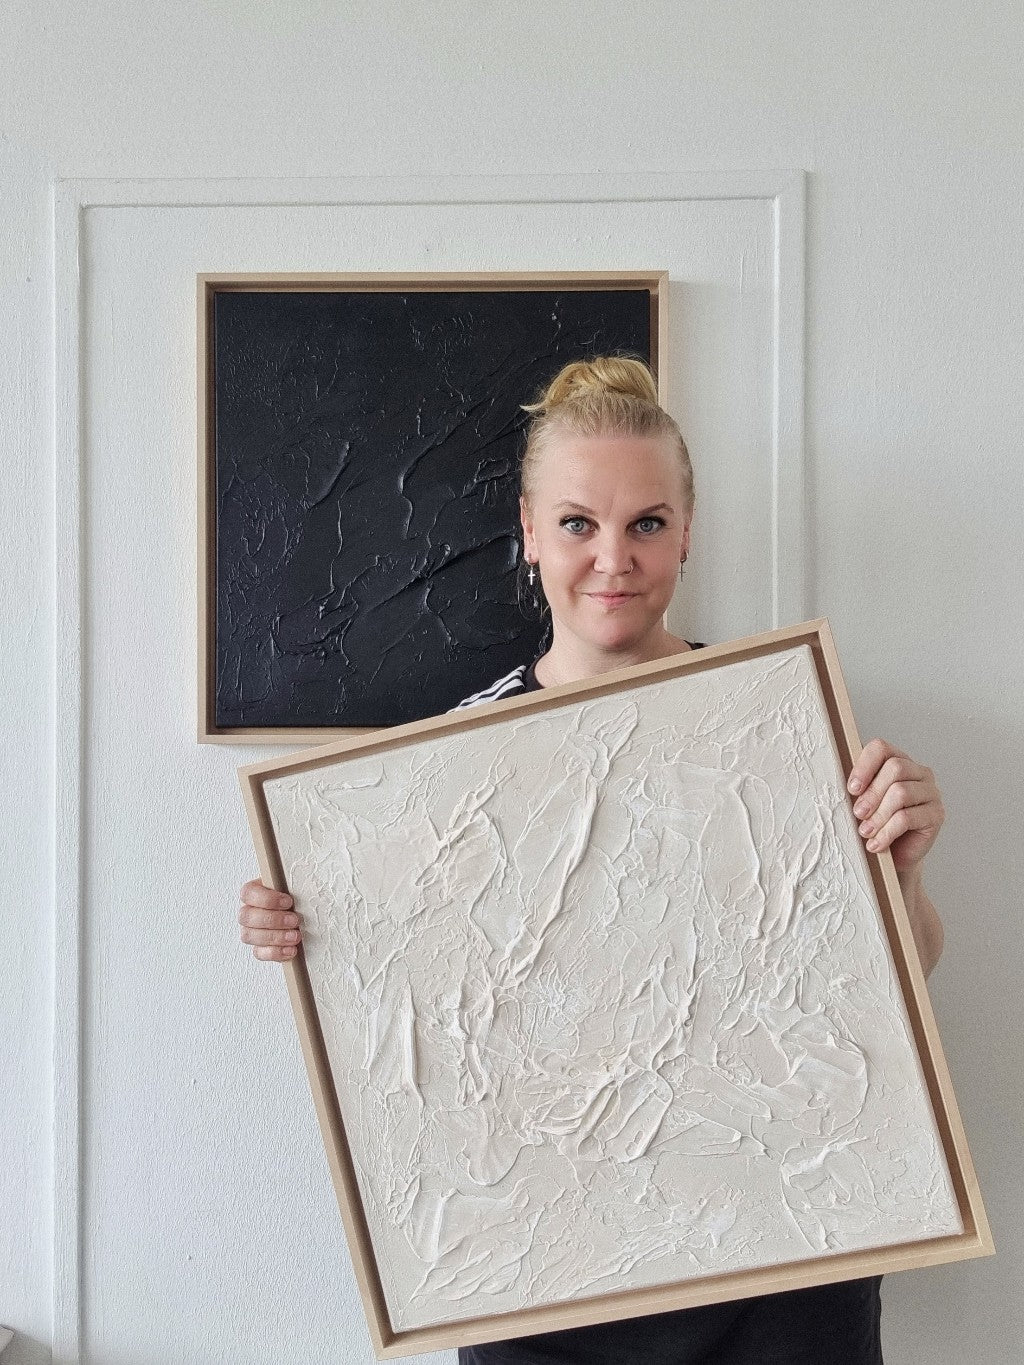 Blonde female artist holding a monochromic textured painting in the studio.